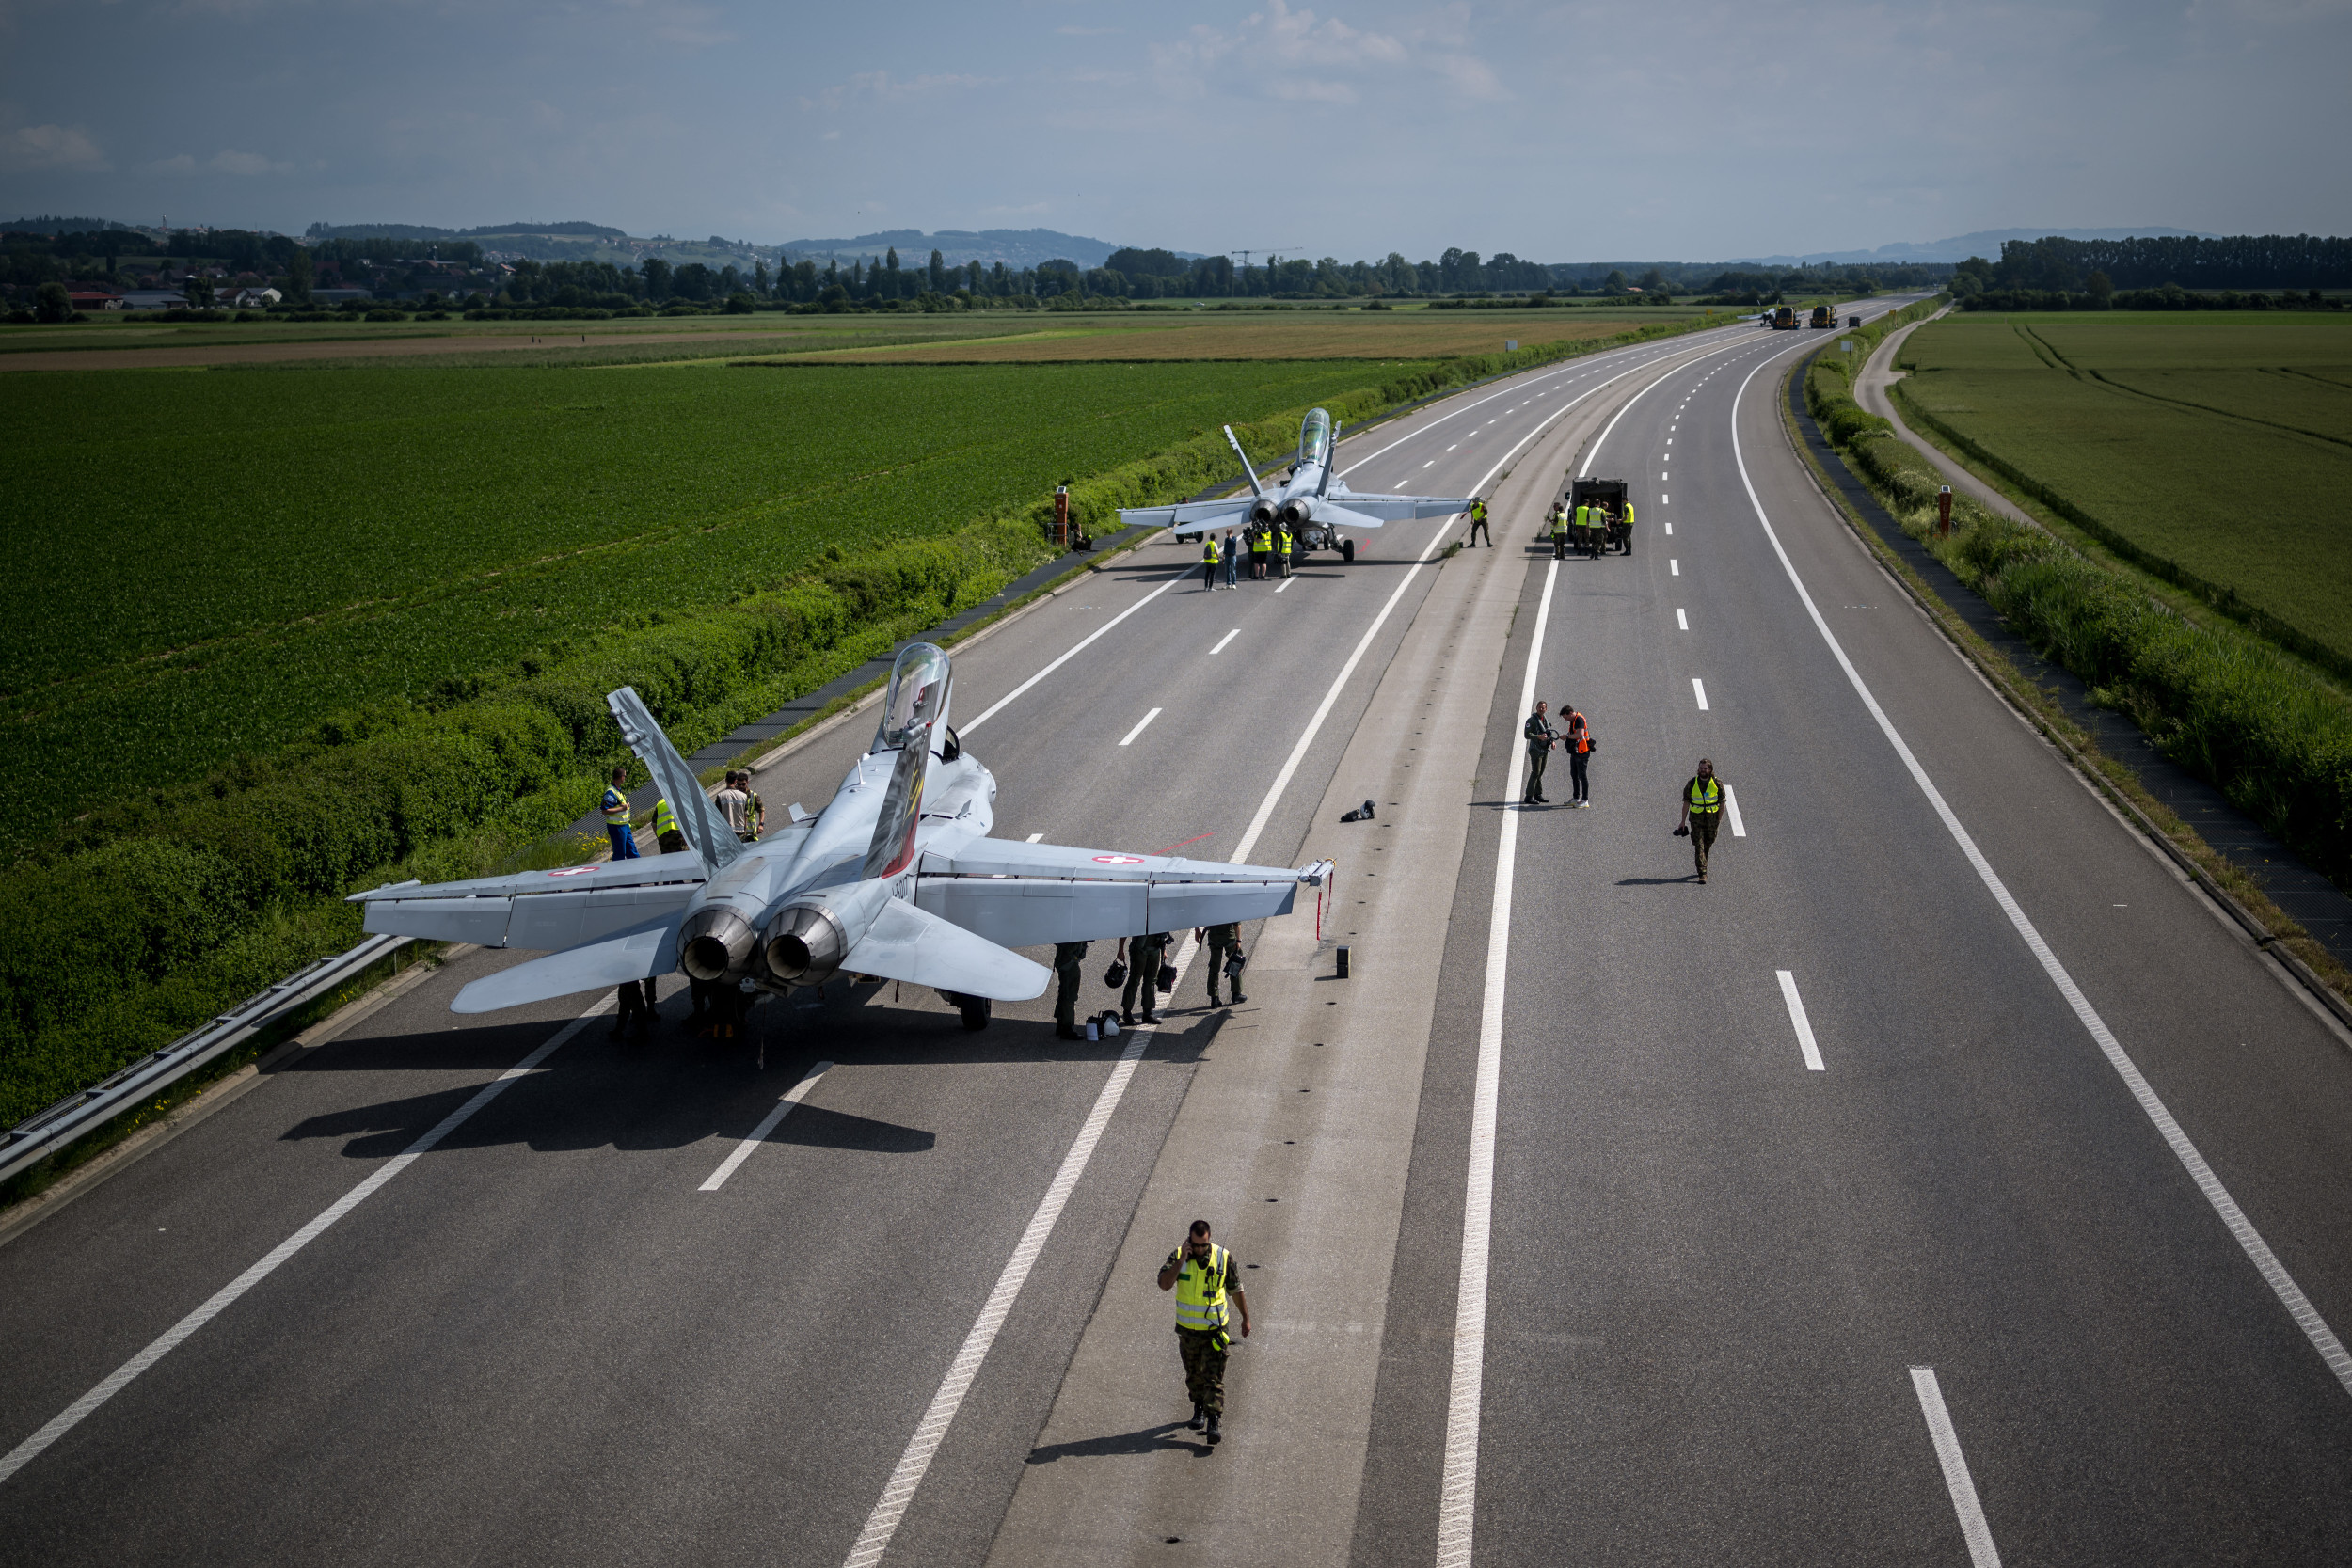 Fighter jets land on highway in emergency training exercise